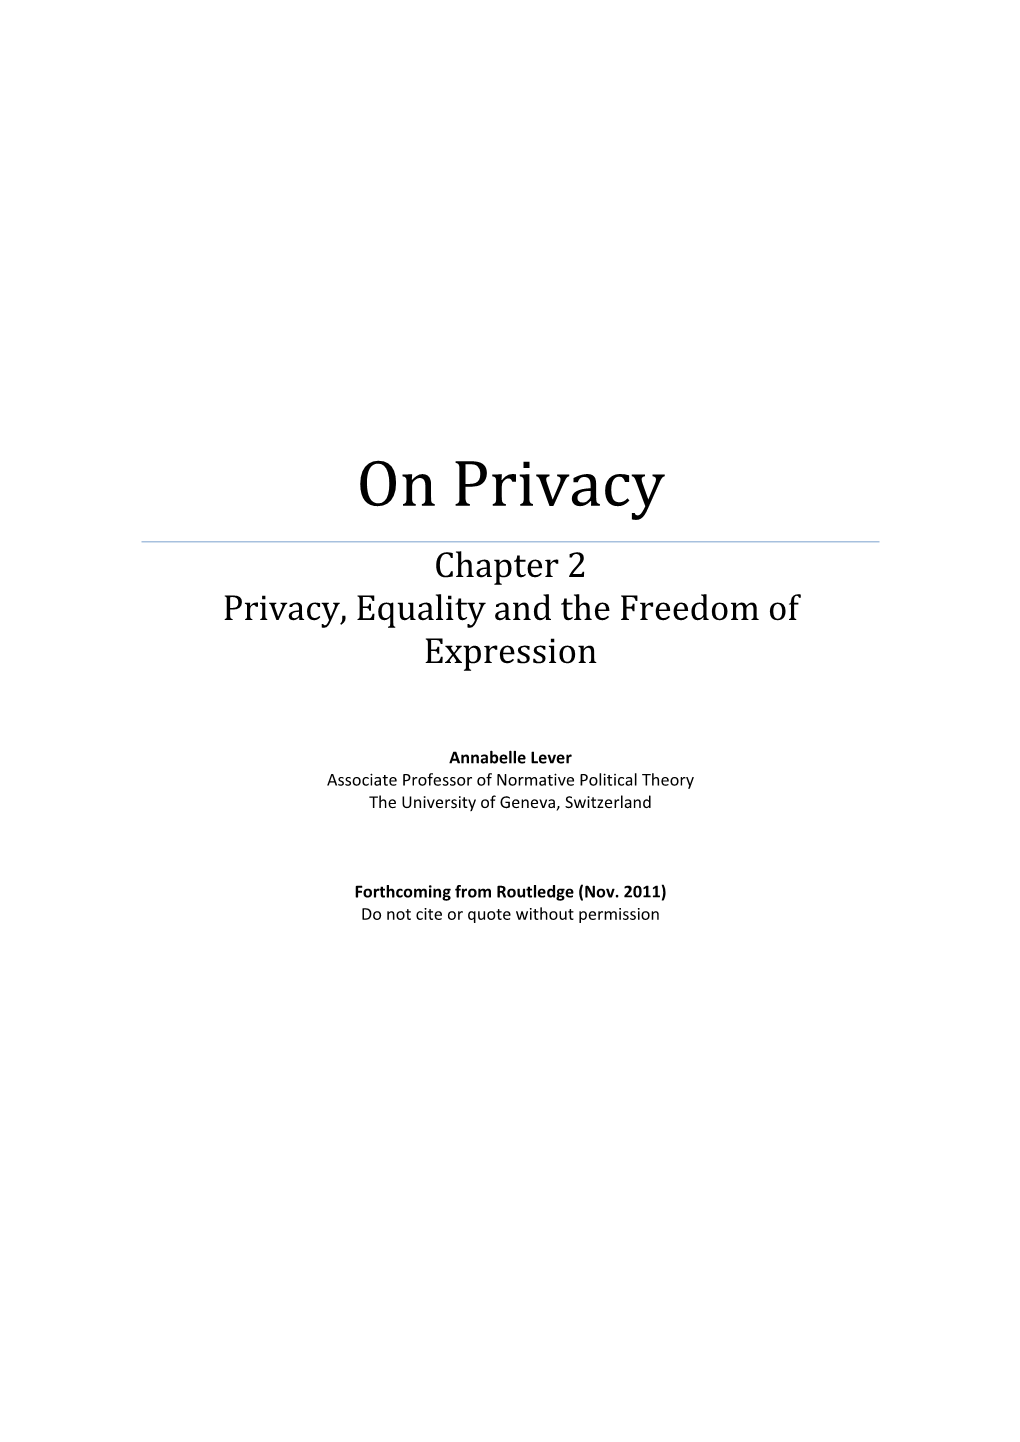 On Privacy Chapter 2 Privacy, Equality and the Freedom of Expression